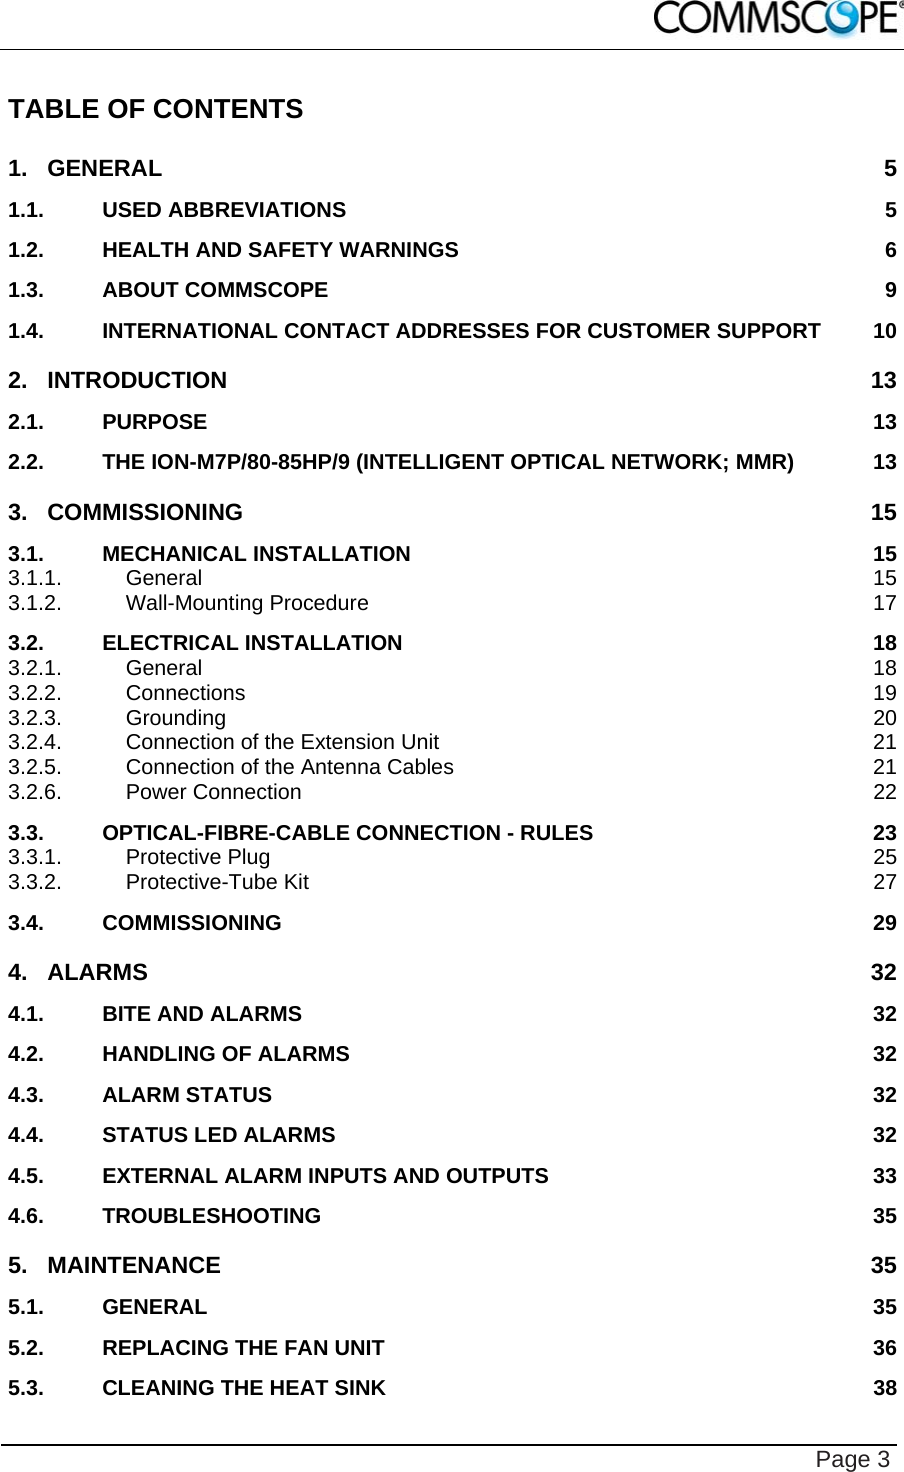    Page 3 TABLE OF CONTENTS 1.GENERAL 51.1.USED ABBREVIATIONS  51.2.HEALTH AND SAFETY WARNINGS  61.3.ABOUT COMMSCOPE  91.4.INTERNATIONAL CONTACT ADDRESSES FOR CUSTOMER SUPPORT  102.INTRODUCTION 132.1.PURPOSE 132.2.THE ION-M7P/80-85HP/9 (INTELLIGENT OPTICAL NETWORK; MMR)  133.COMMISSIONING 153.1.MECHANICAL INSTALLATION  153.1.1.General 153.1.2.Wall-Mounting Procedure  173.2.ELECTRICAL INSTALLATION  183.2.1.General 183.2.2.Connections 193.2.3.Grounding 203.2.4.Connection of the Extension Unit  213.2.5.Connection of the Antenna Cables  213.2.6.Power Connection  223.3.OPTICAL-FIBRE-CABLE CONNECTION - RULES  233.3.1.Protective Plug  253.3.2.Protective-Tube Kit  273.4.COMMISSIONING 294.ALARMS 324.1.BITE AND ALARMS  324.2.HANDLING OF ALARMS  324.3.ALARM STATUS  324.4.STATUS LED ALARMS  324.5.EXTERNAL ALARM INPUTS AND OUTPUTS  334.6.TROUBLESHOOTING 355.MAINTENANCE 355.1.GENERAL 355.2.REPLACING THE FAN UNIT  365.3.CLEANING THE HEAT SINK  38